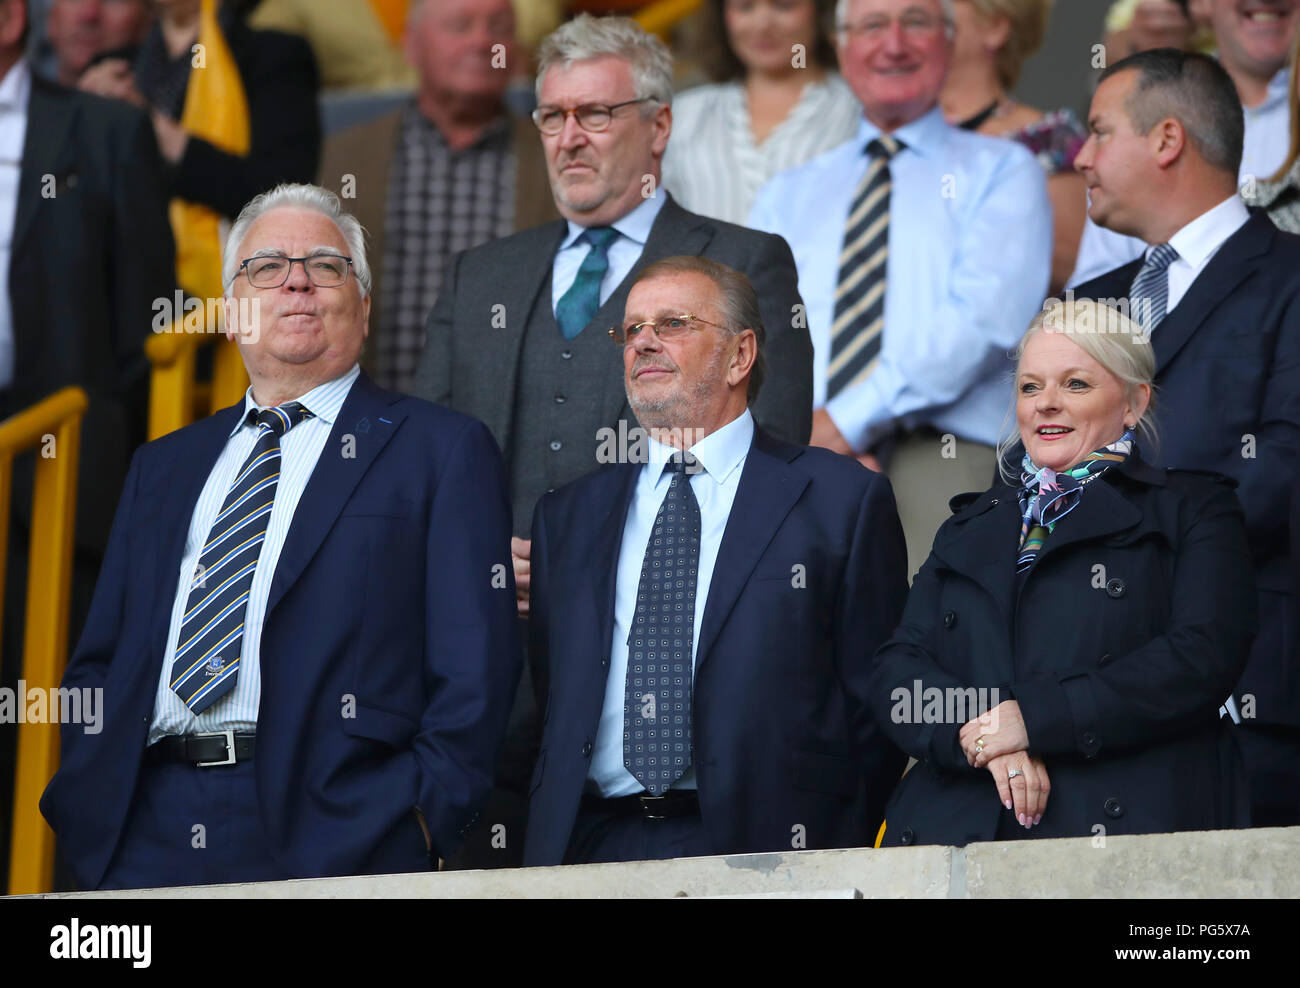 Everton Chairman Bill Kenwright (left) and Everton CEO and Director Denise Barrett-Baxendale (right) in the stands Stock Photo